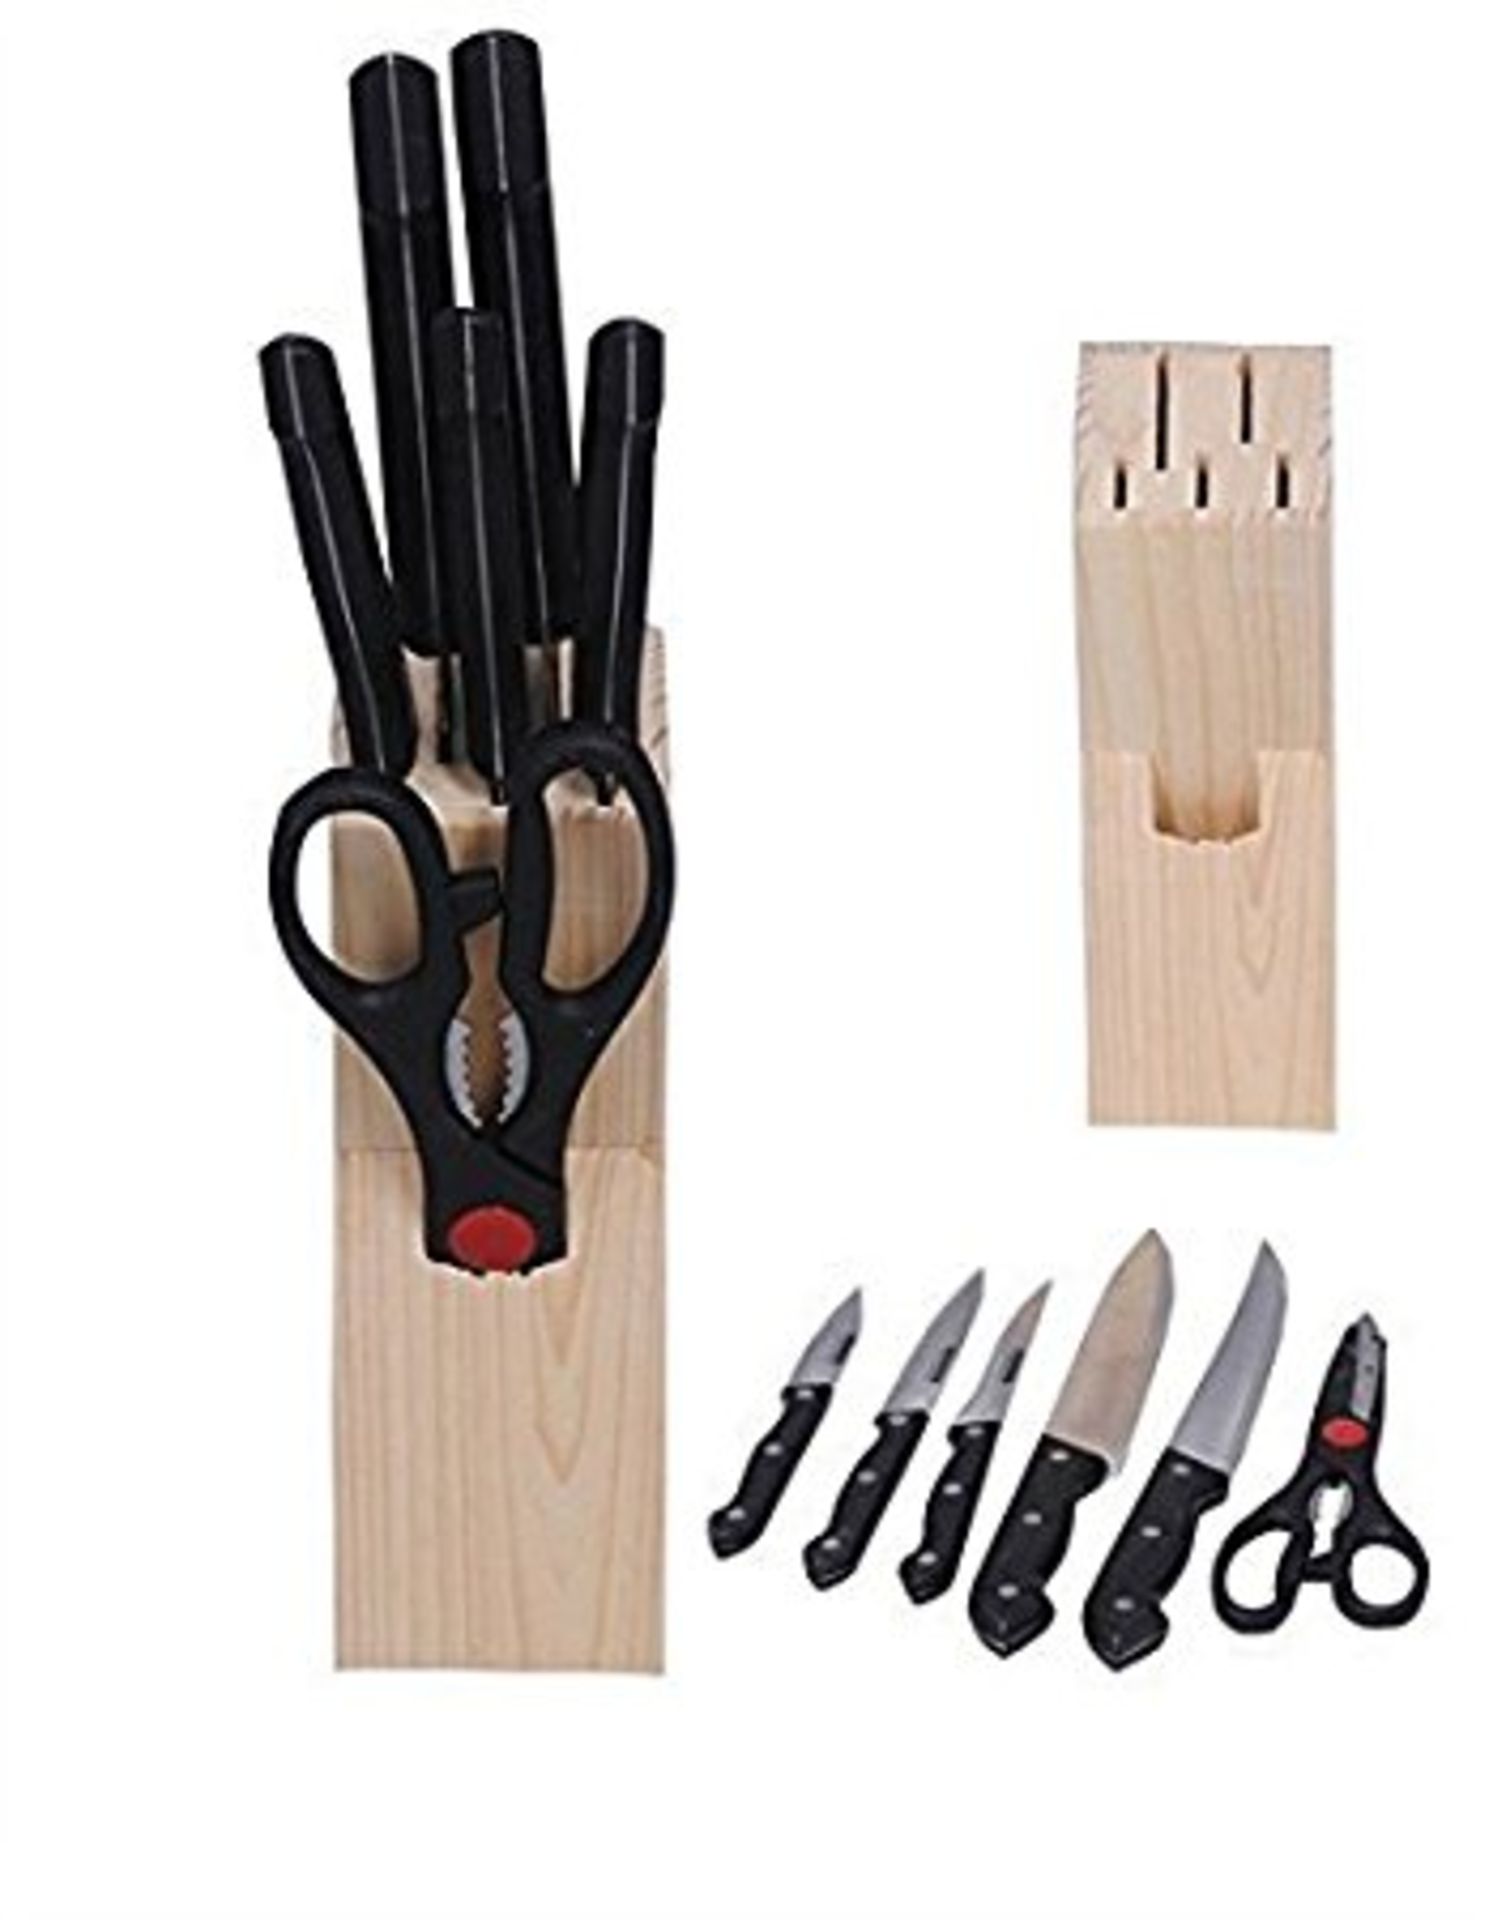 V *TRADE QTY* Brand New 7 Piece Stainless Steel Kife Set With Wooden Block - Includes - Paring Knife